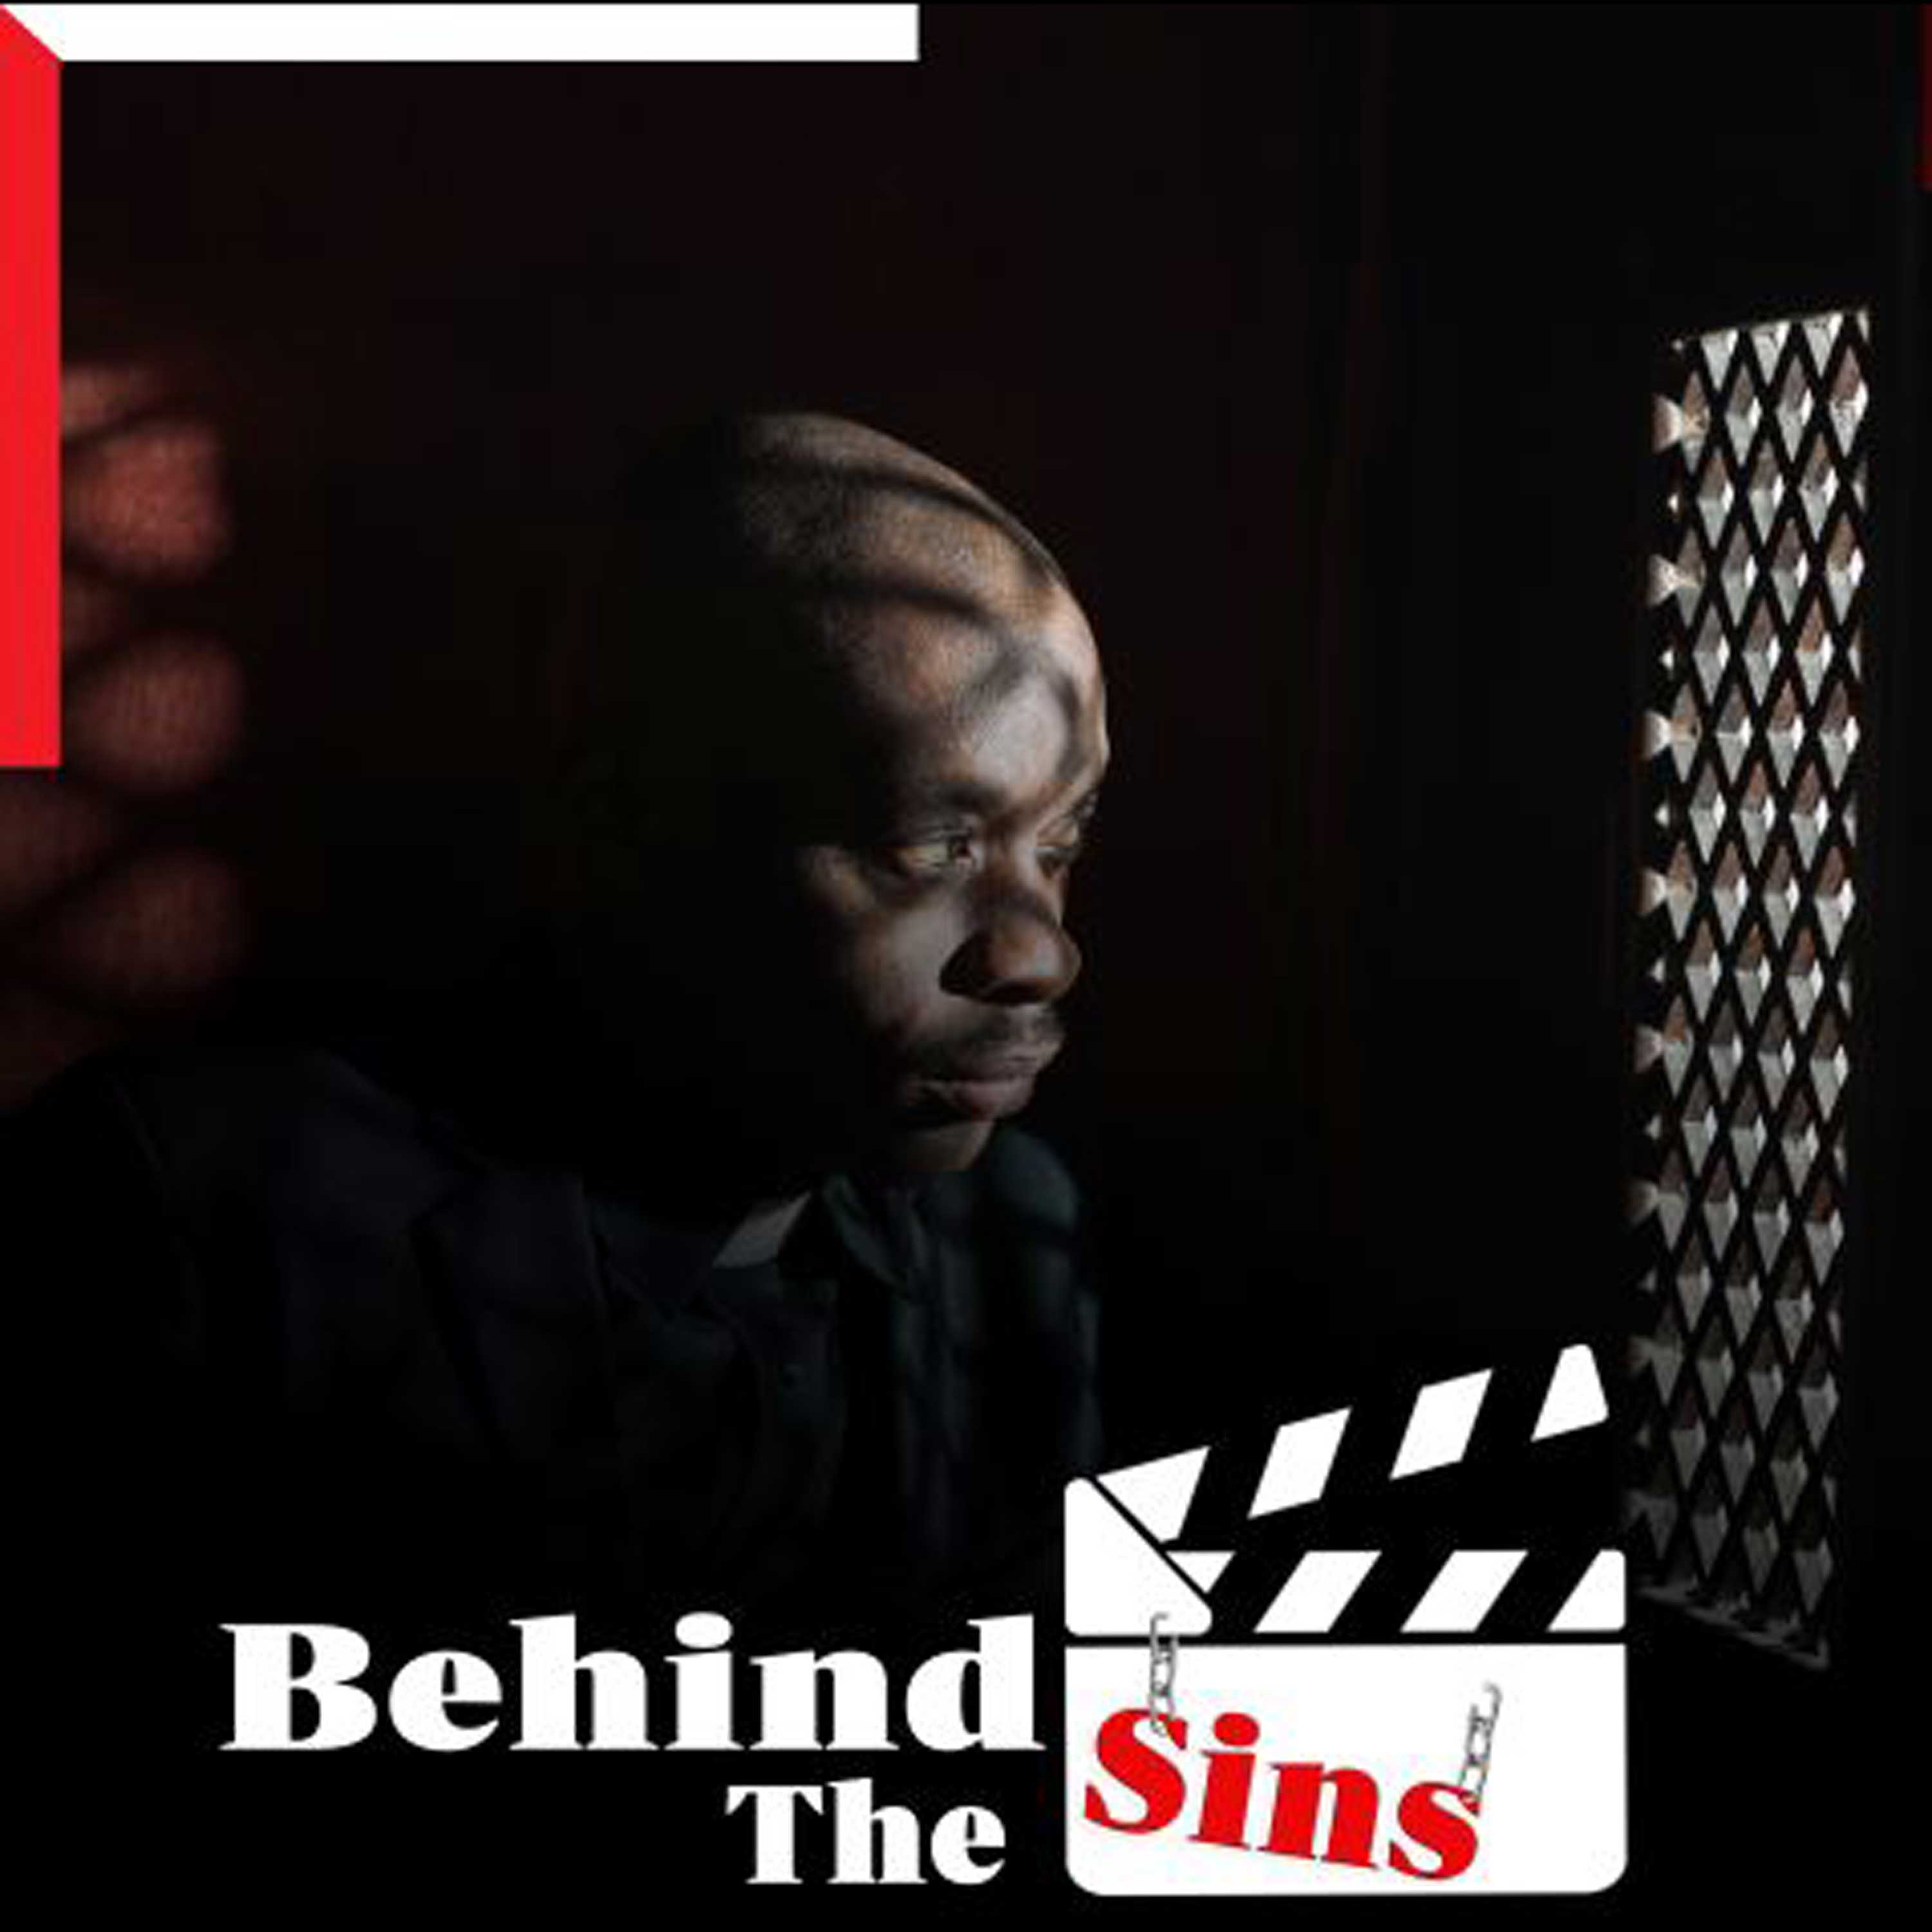 Does Illuminati really exist?: Behind the sins podcast